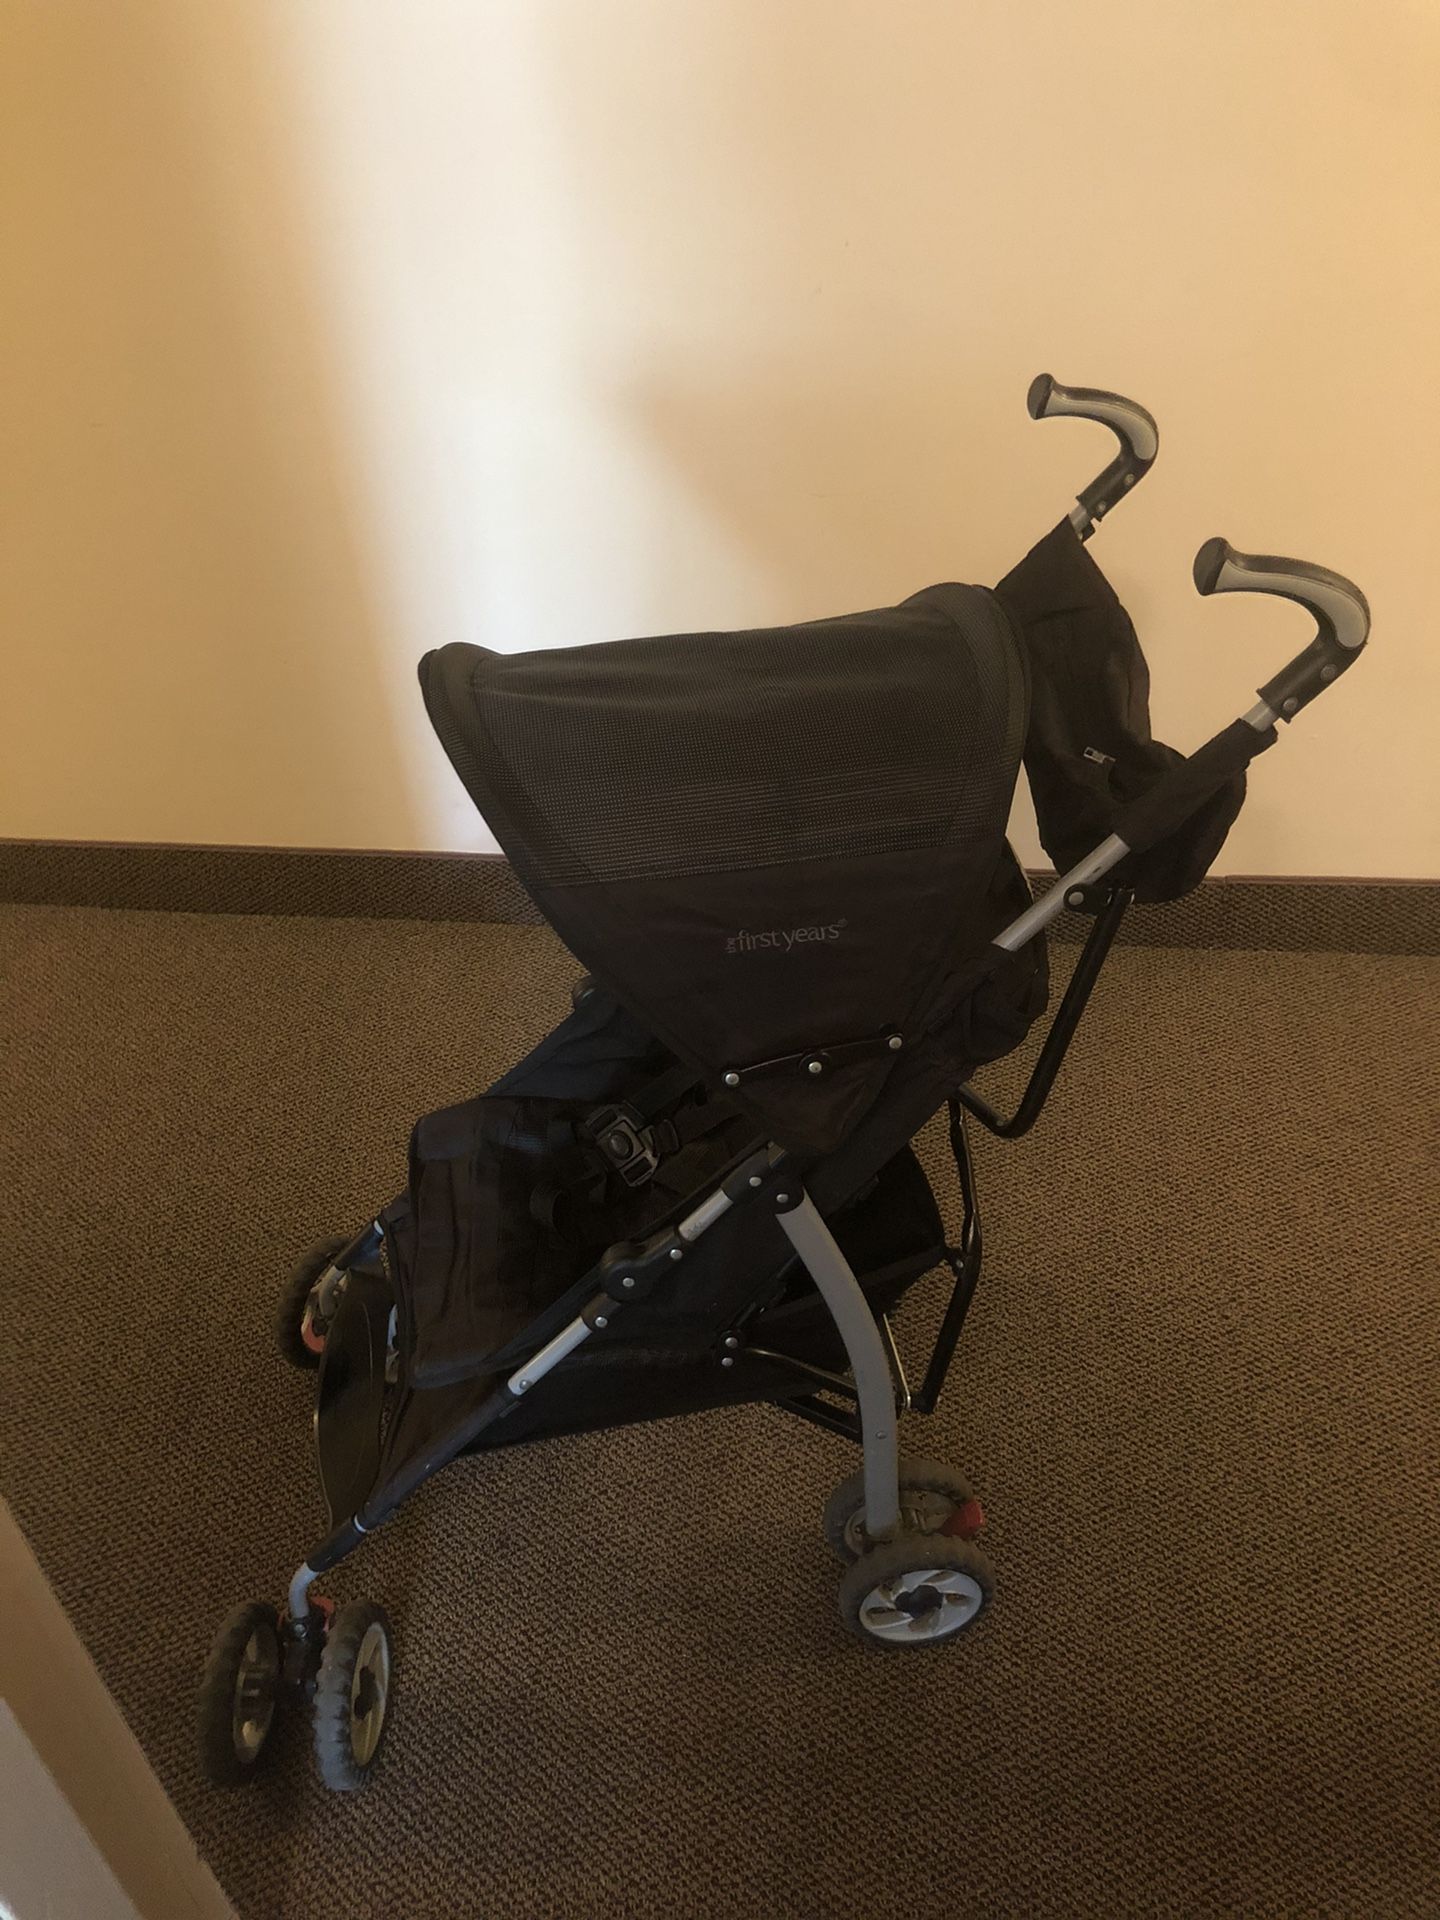 The firts year’s stroller